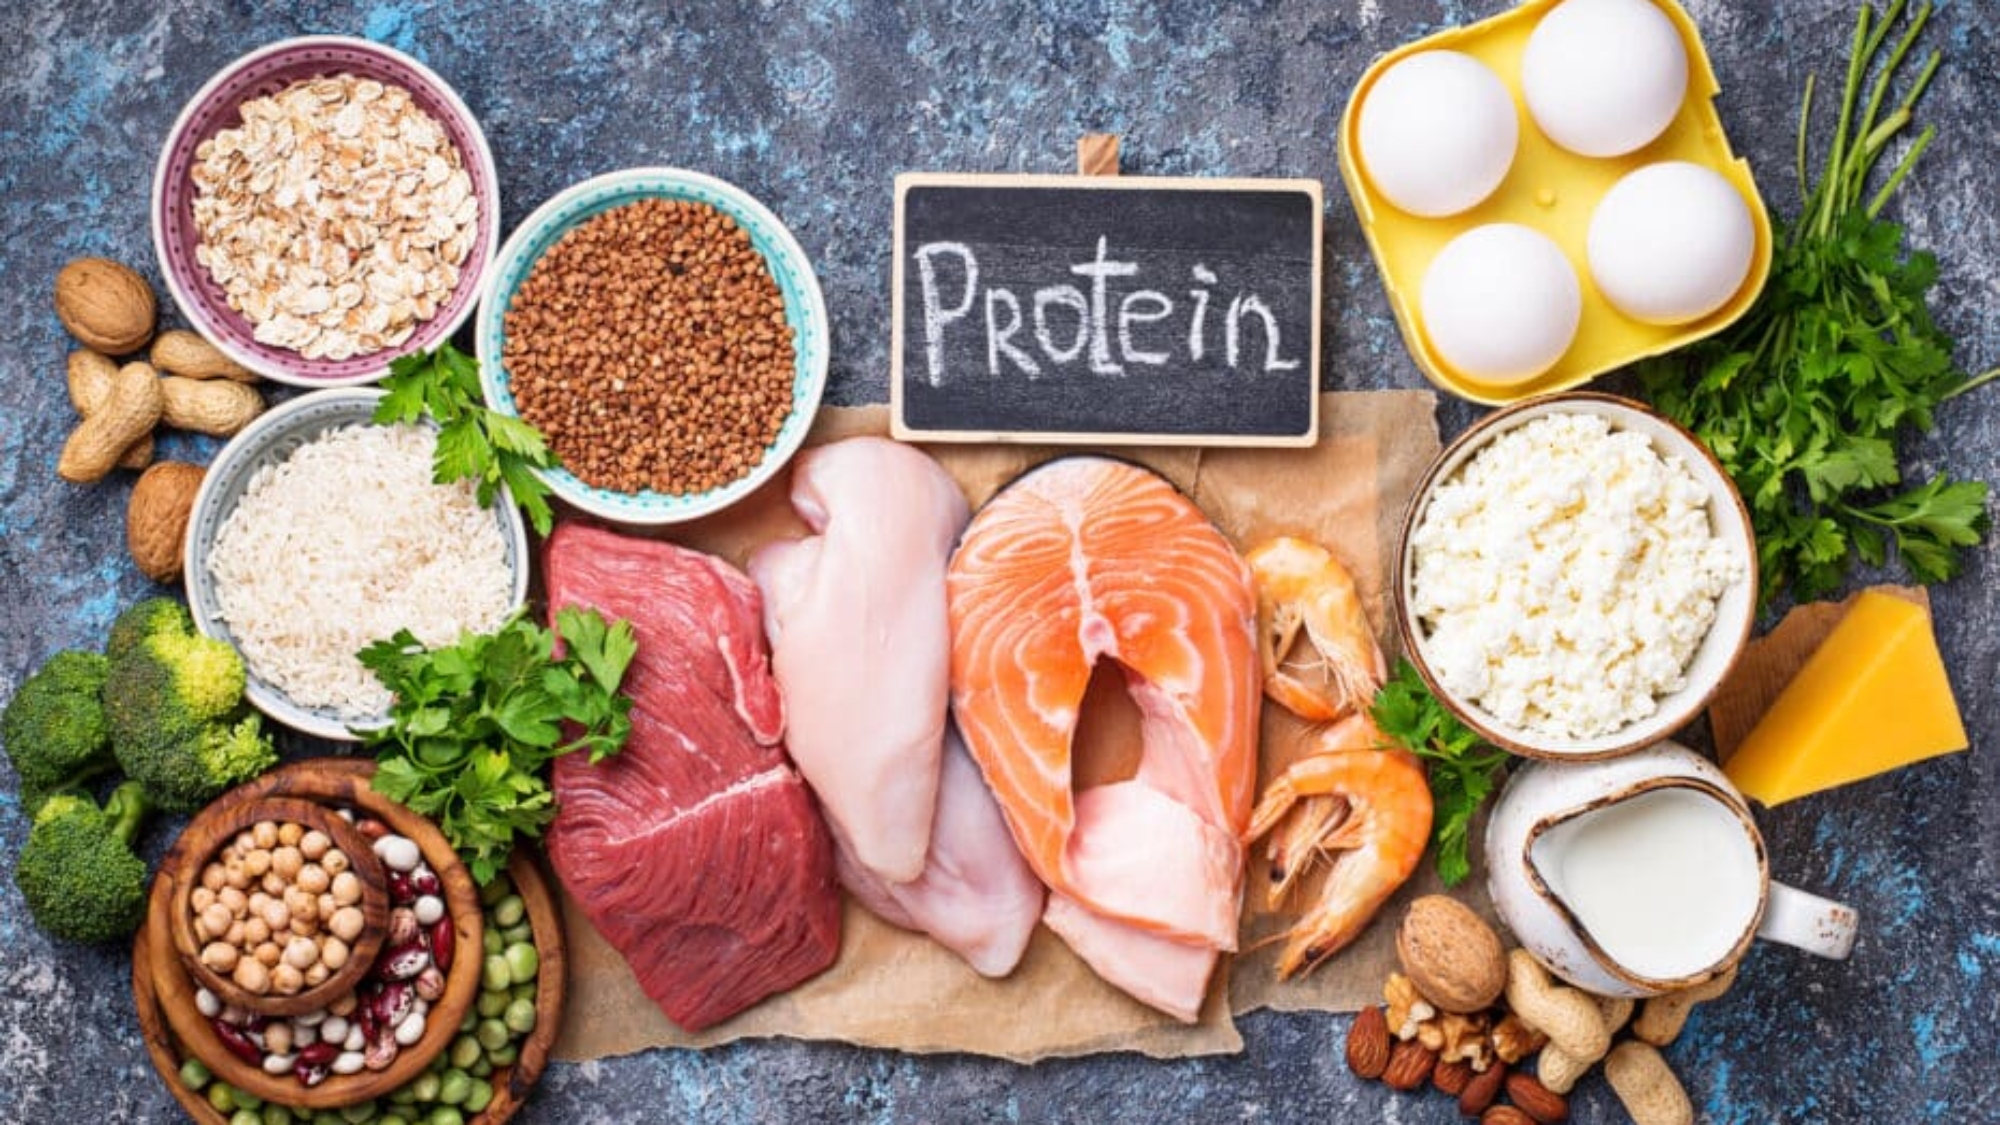 Healthy food high in protein. Meat, fish, dairy products, nuts and beans. Top view